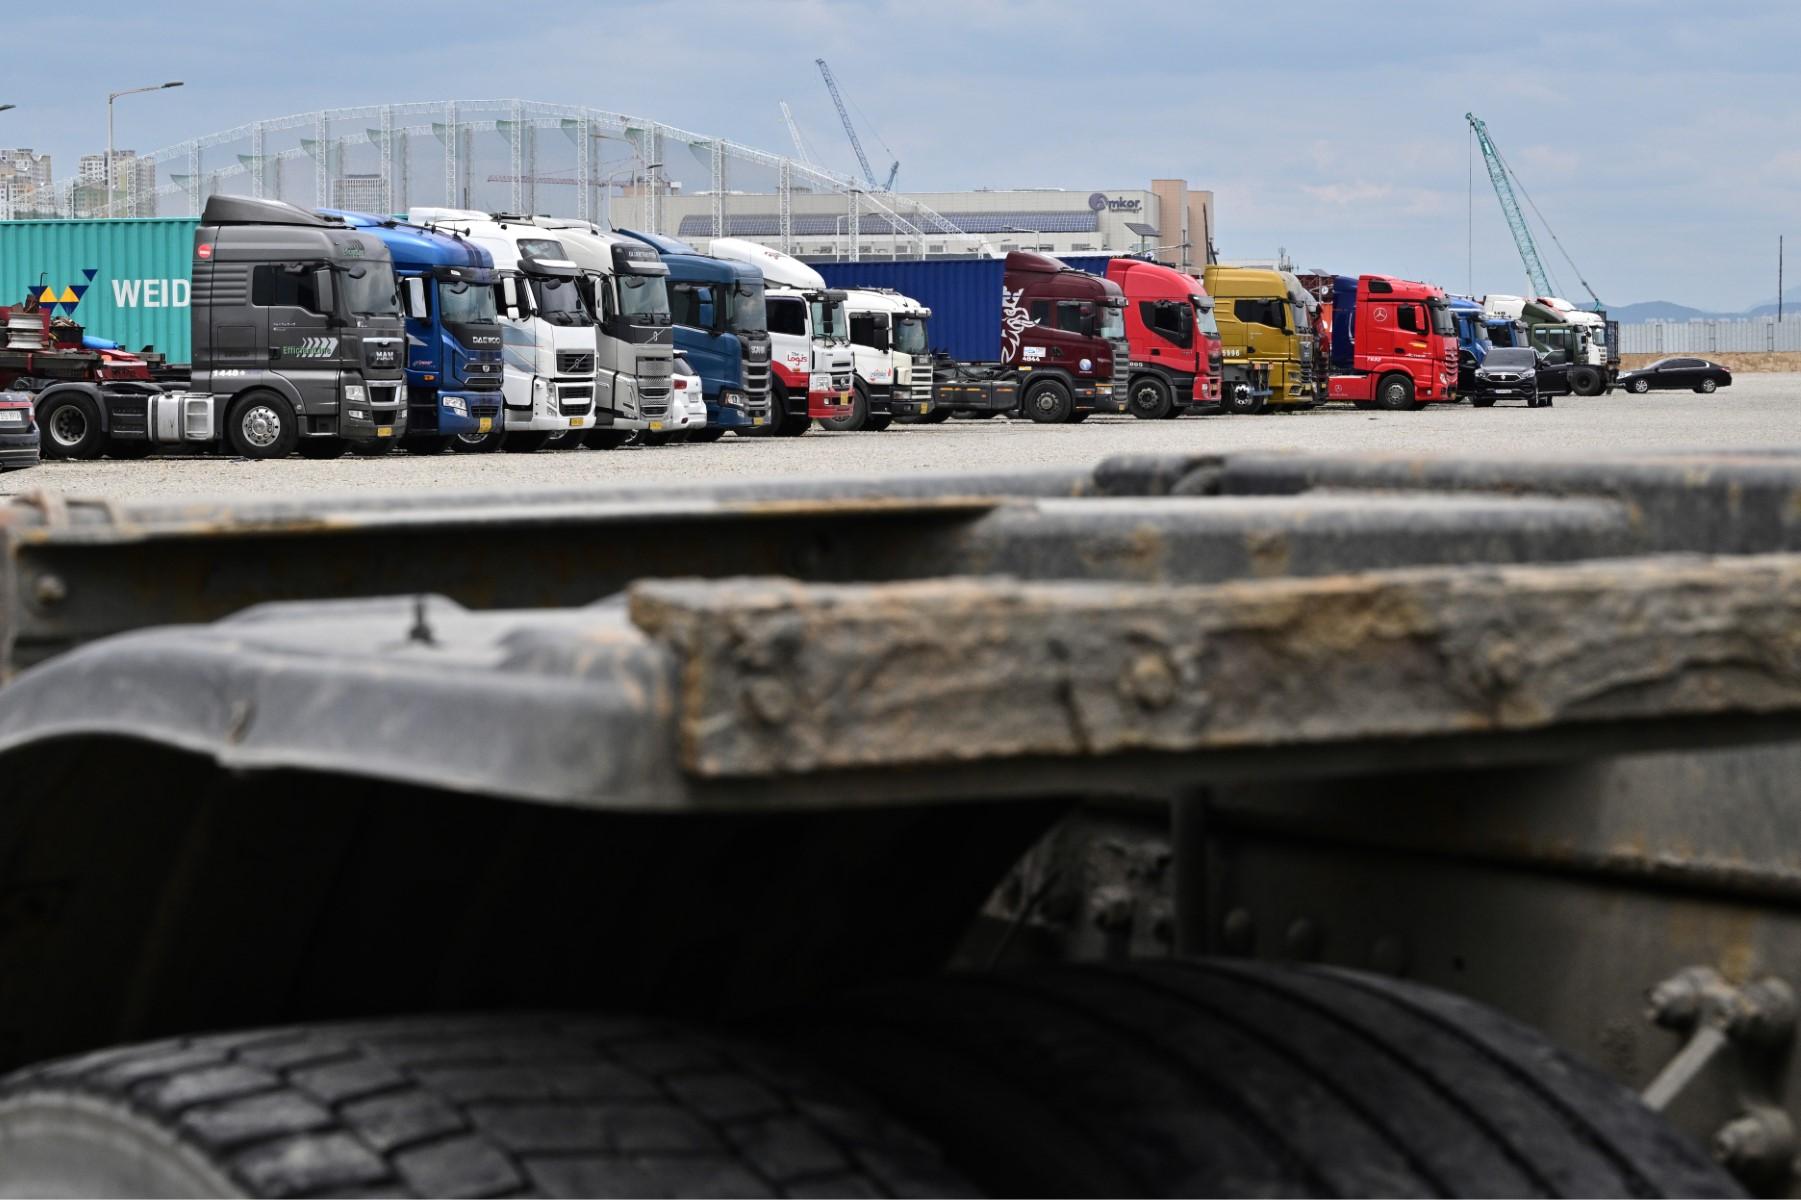 Trucks which have been parked as part of a strike are seen in a parking lot in Incheon on June 14, on the eighth day of protests over rising fuel costs that have further snarled global supply chains. Photo: AFP